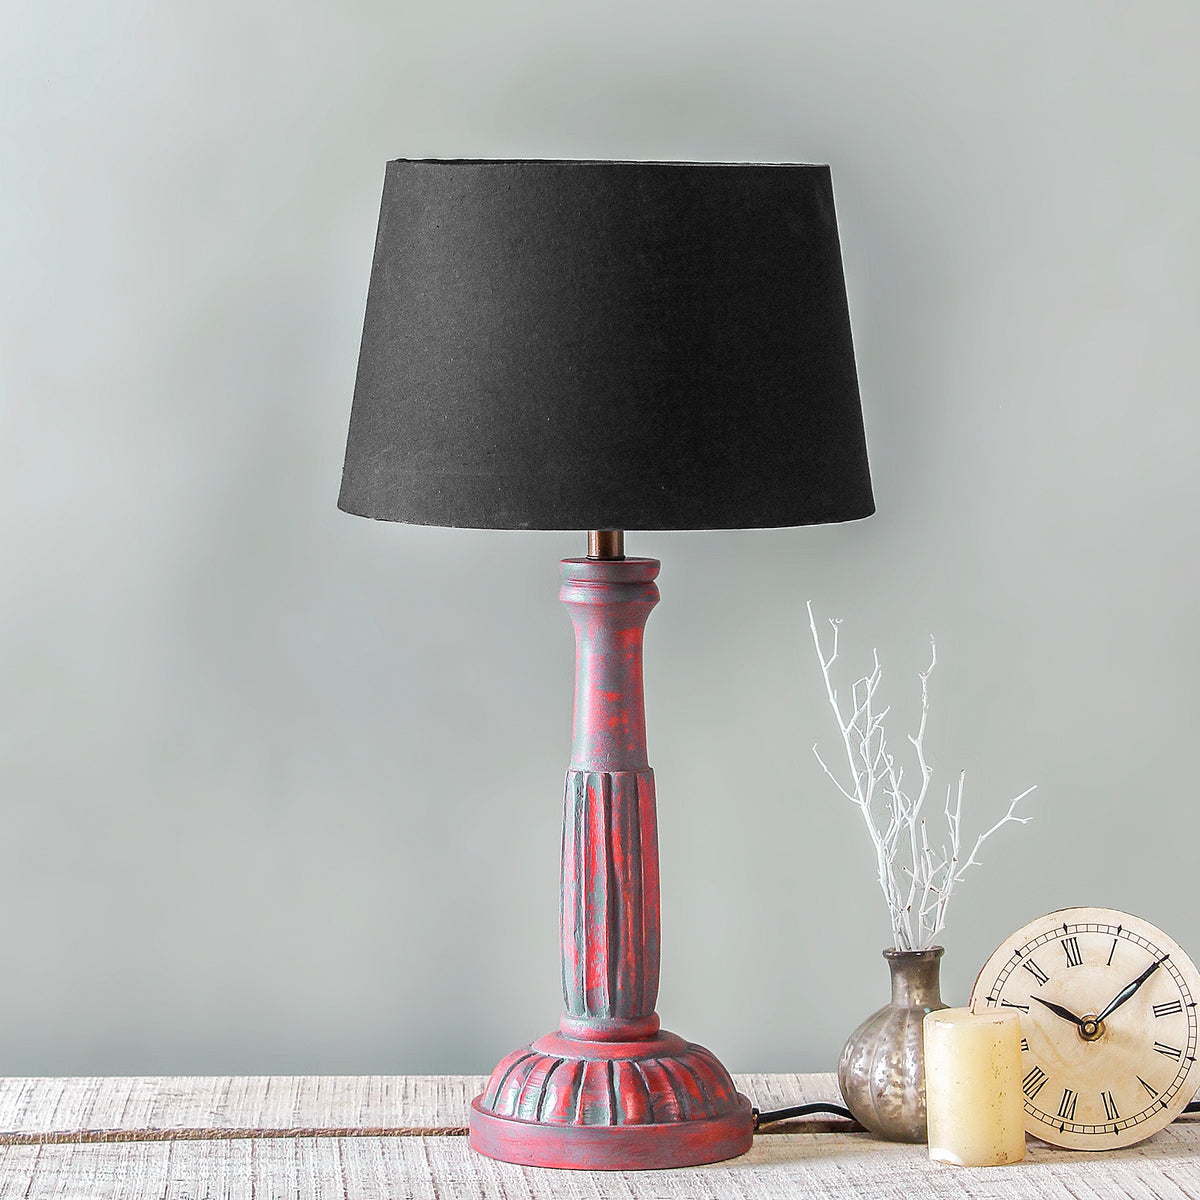 Buy Arwen Antique Red Wood Table Lamps online